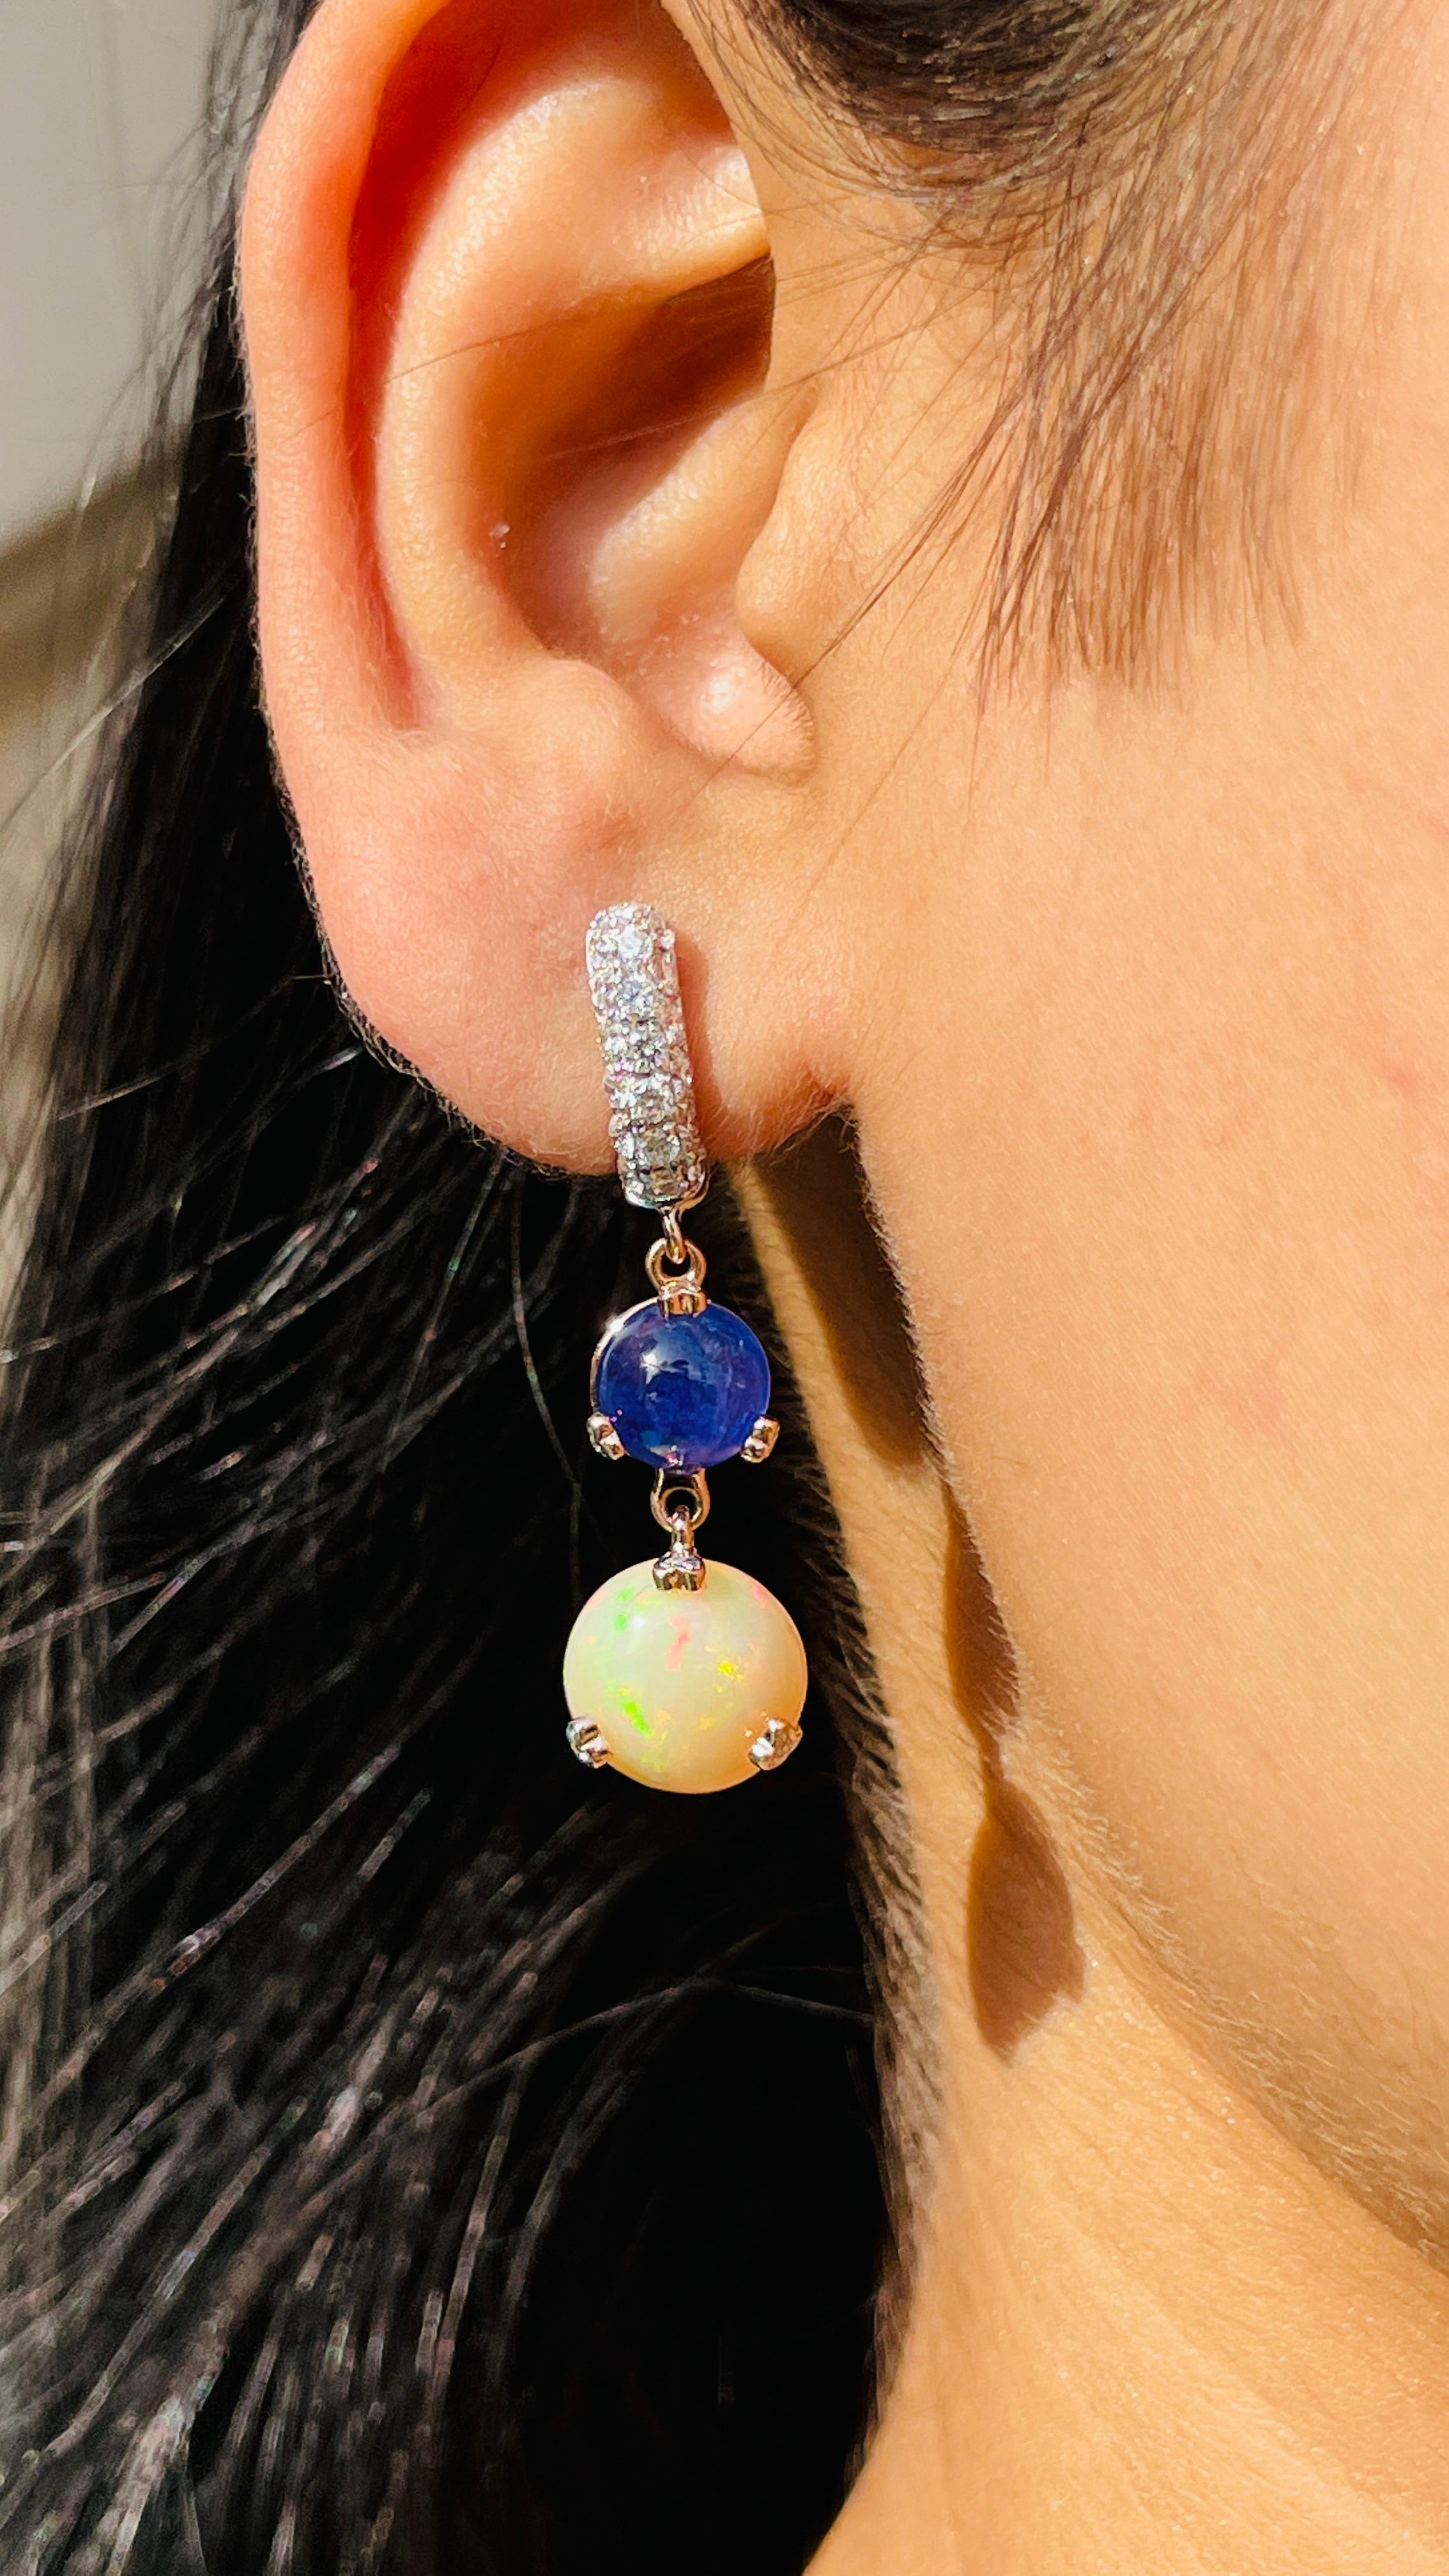 Blue Sapphire and Opal Dangle earrings to make a statement with your look. These earrings create a sparkling, luxurious look featuring round cut gemstone.
If you love to gravitate towards unique styles, this piece of jewelry is perfect for